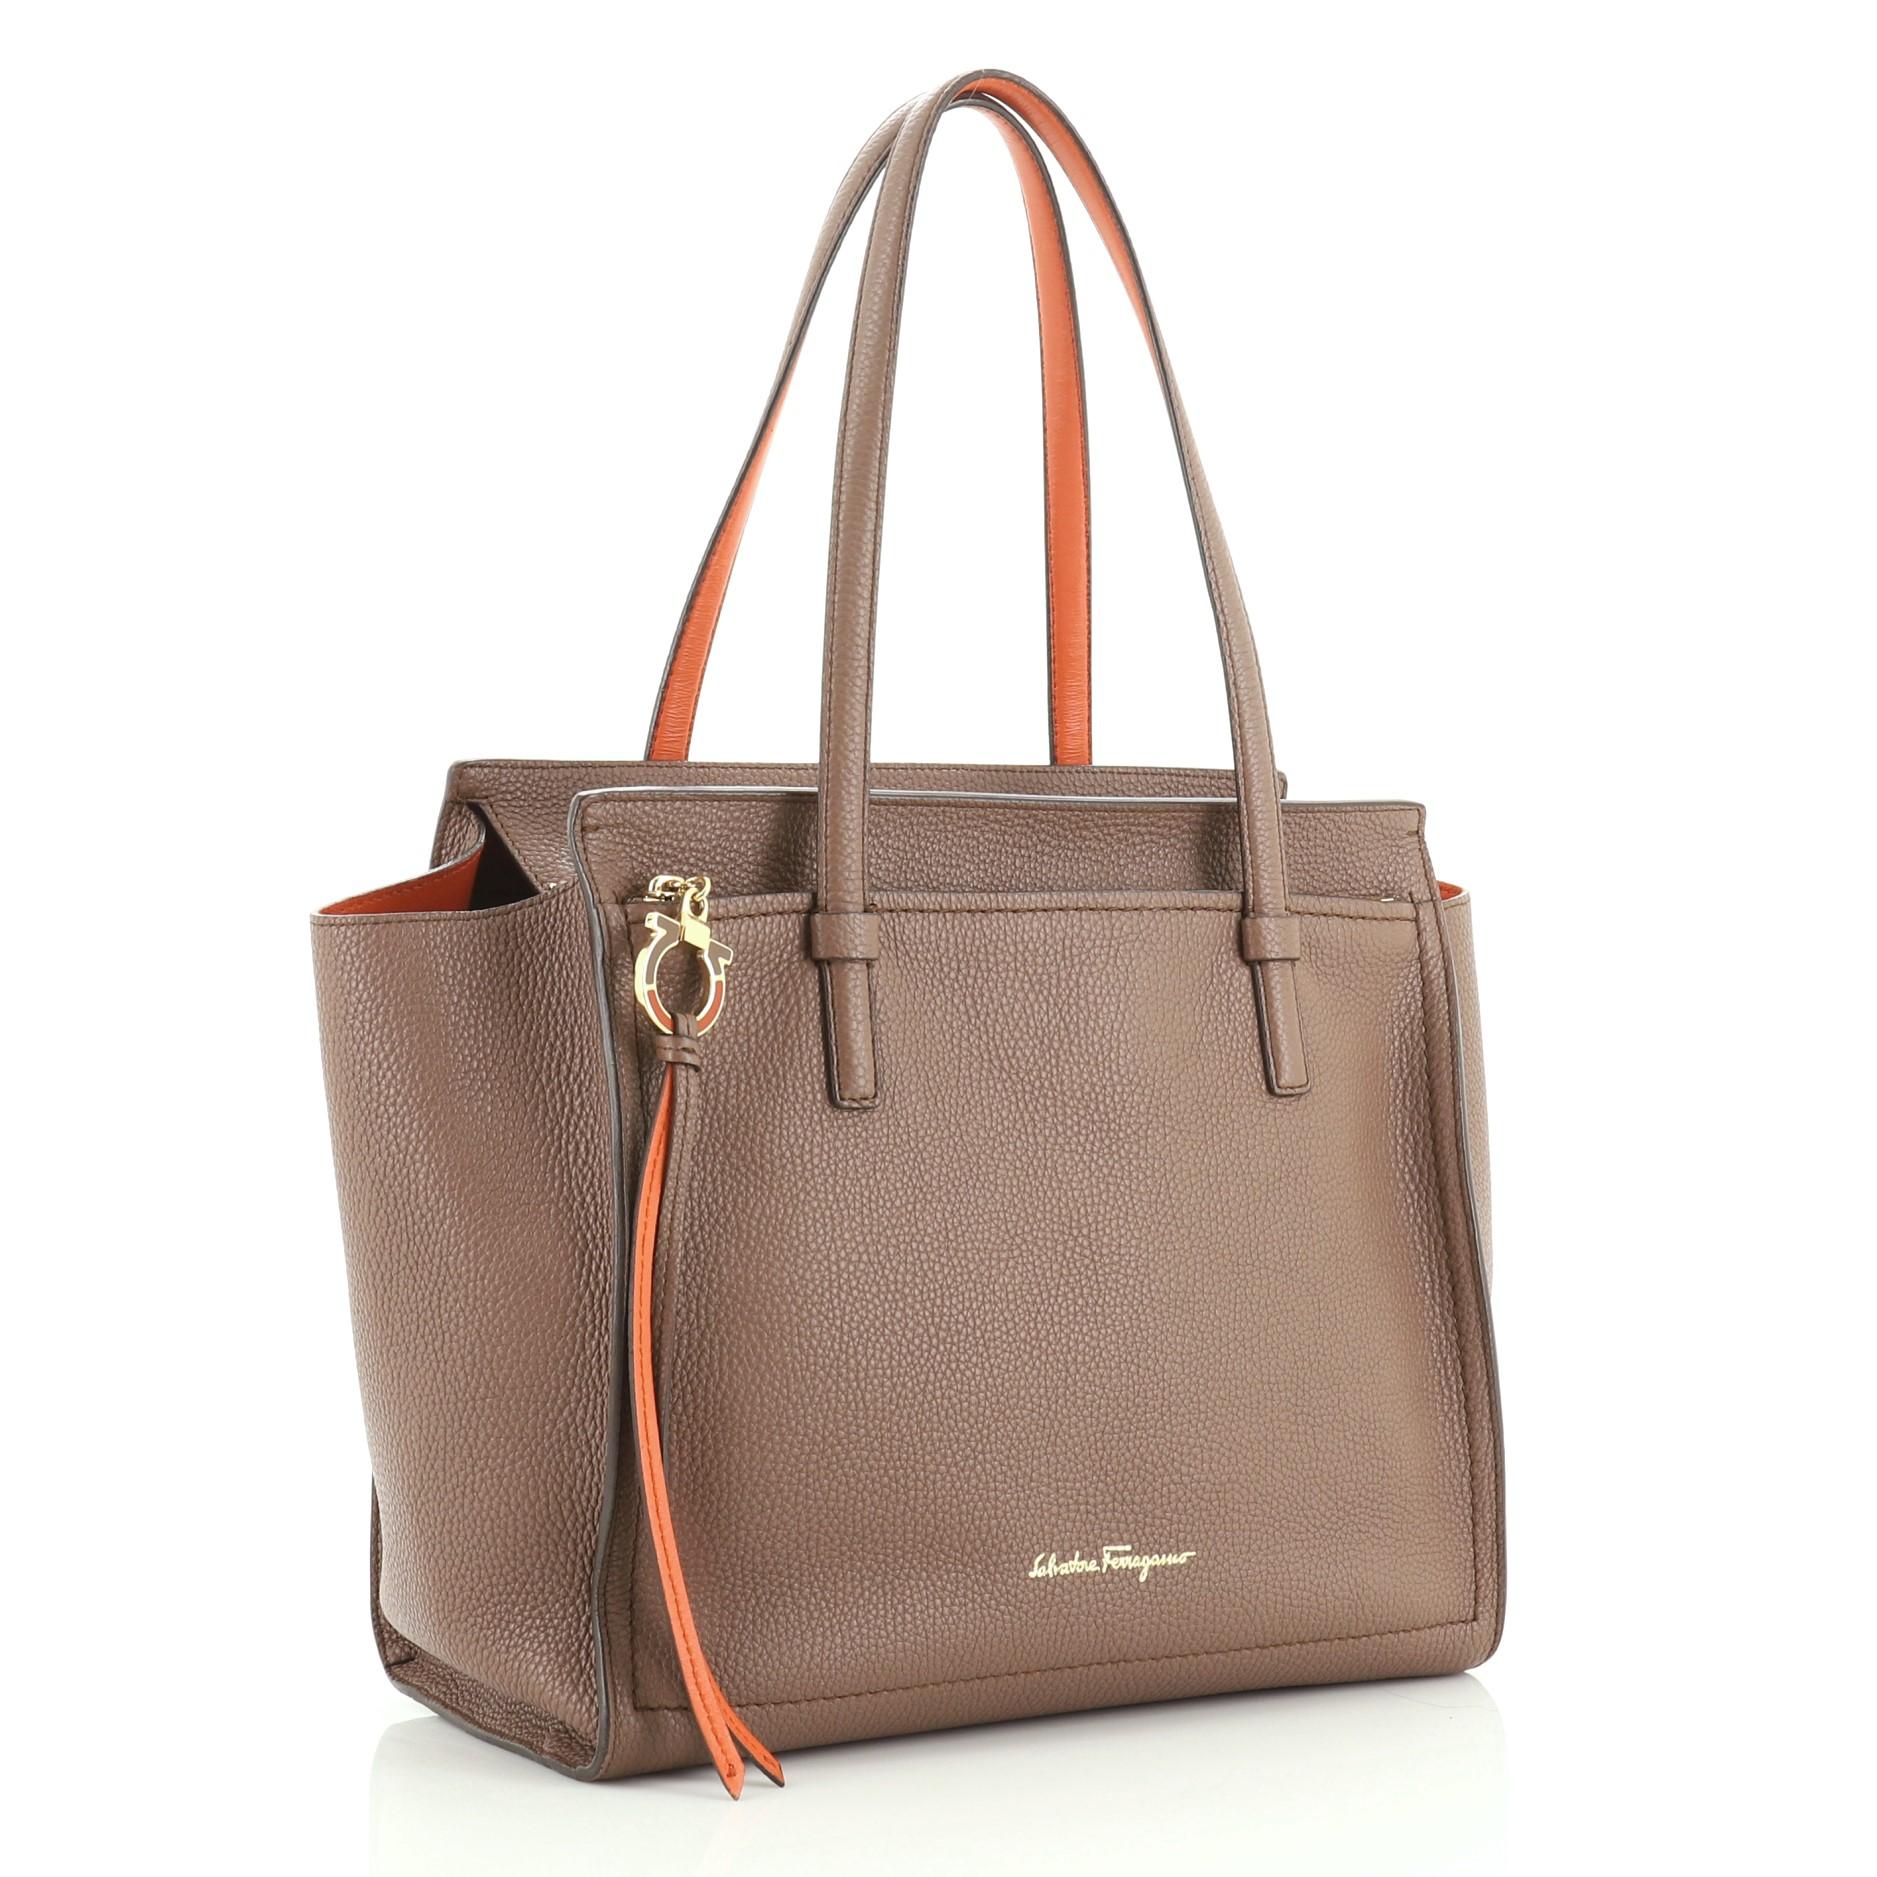 This Salvatore Ferragamo Amy Tote Pebbled Leather Medium, crafted from neutral pebbled leather, features dual flat shoulder strap, exterior front zip pocket with Gancio zip pull, protective base studs and gold-tone hardware. Its zip closure opens to